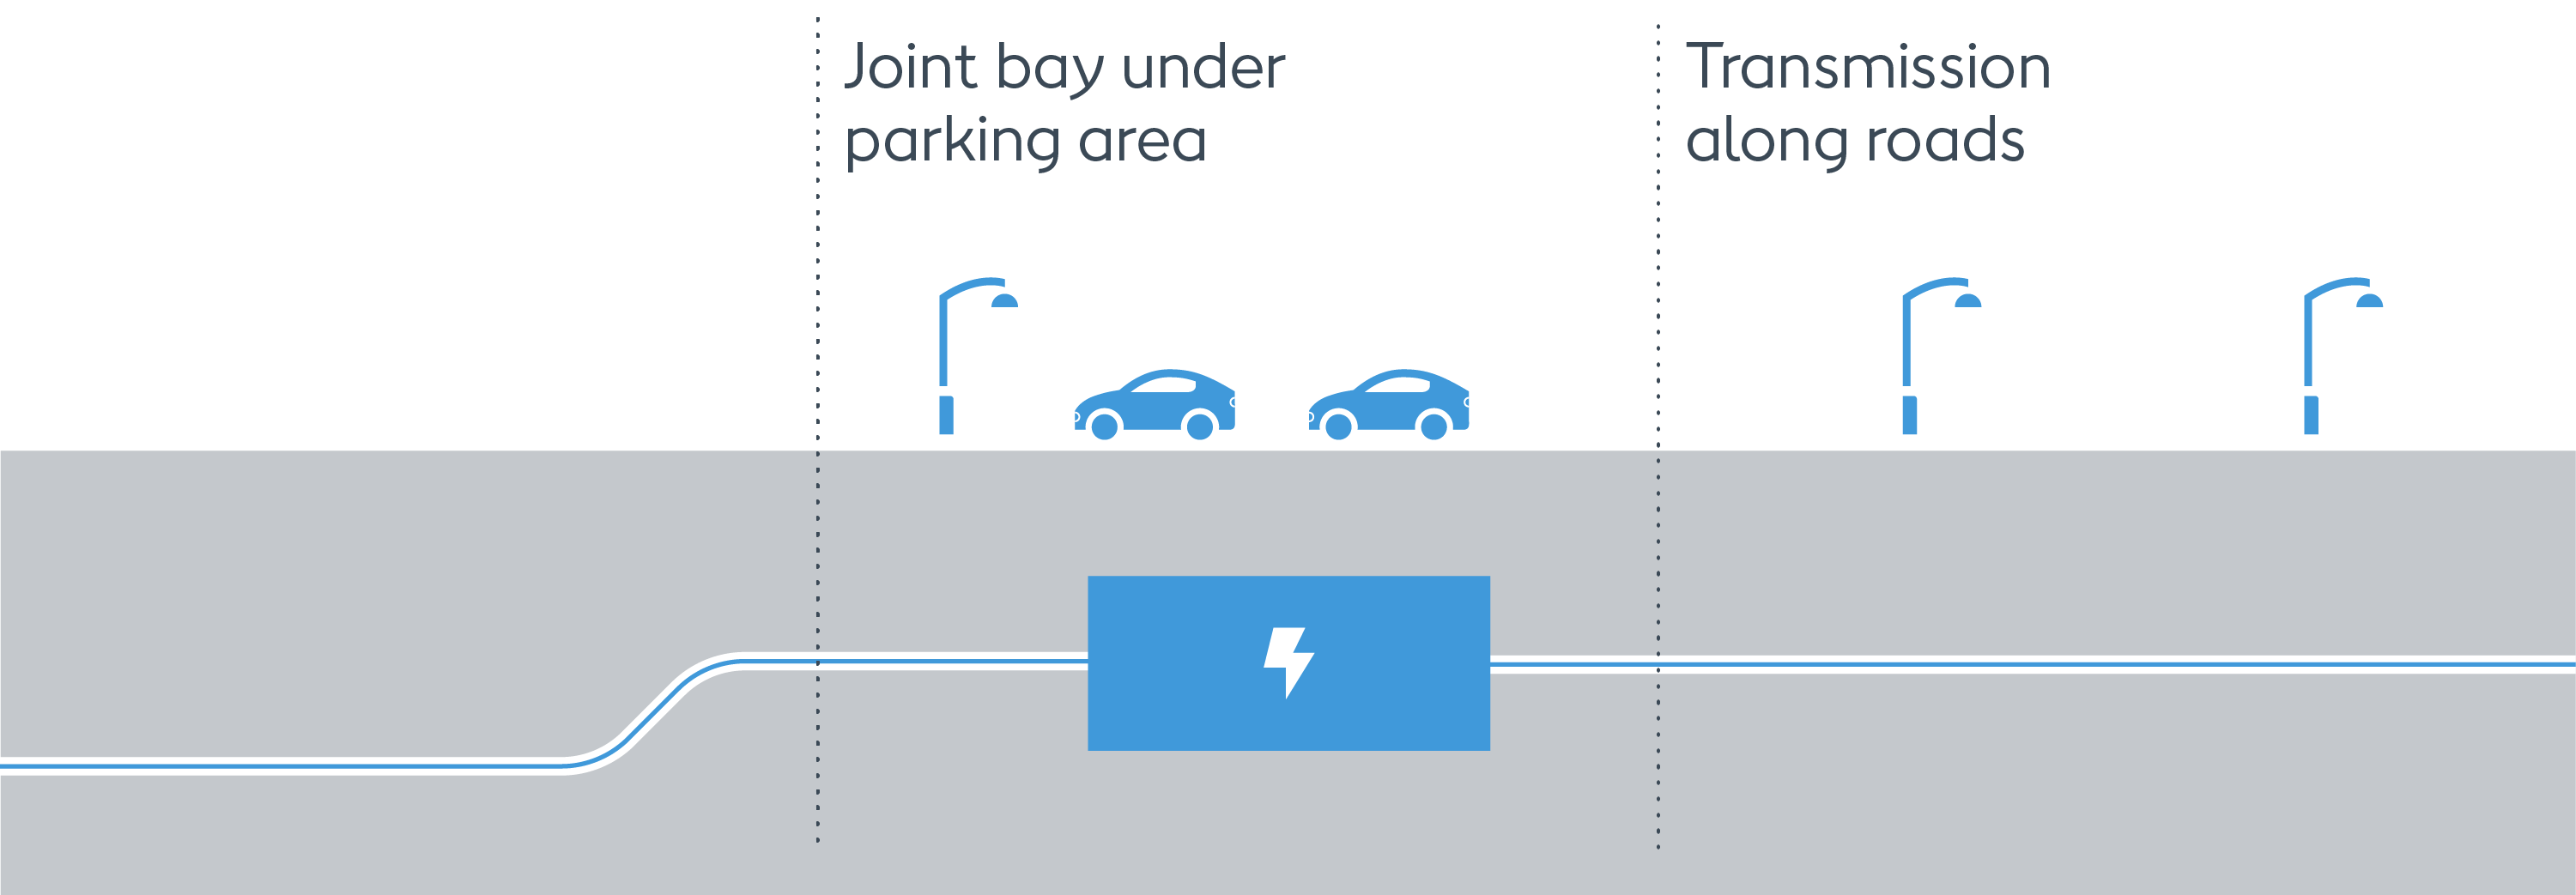 The transition joint bay is typically located under a parking lot